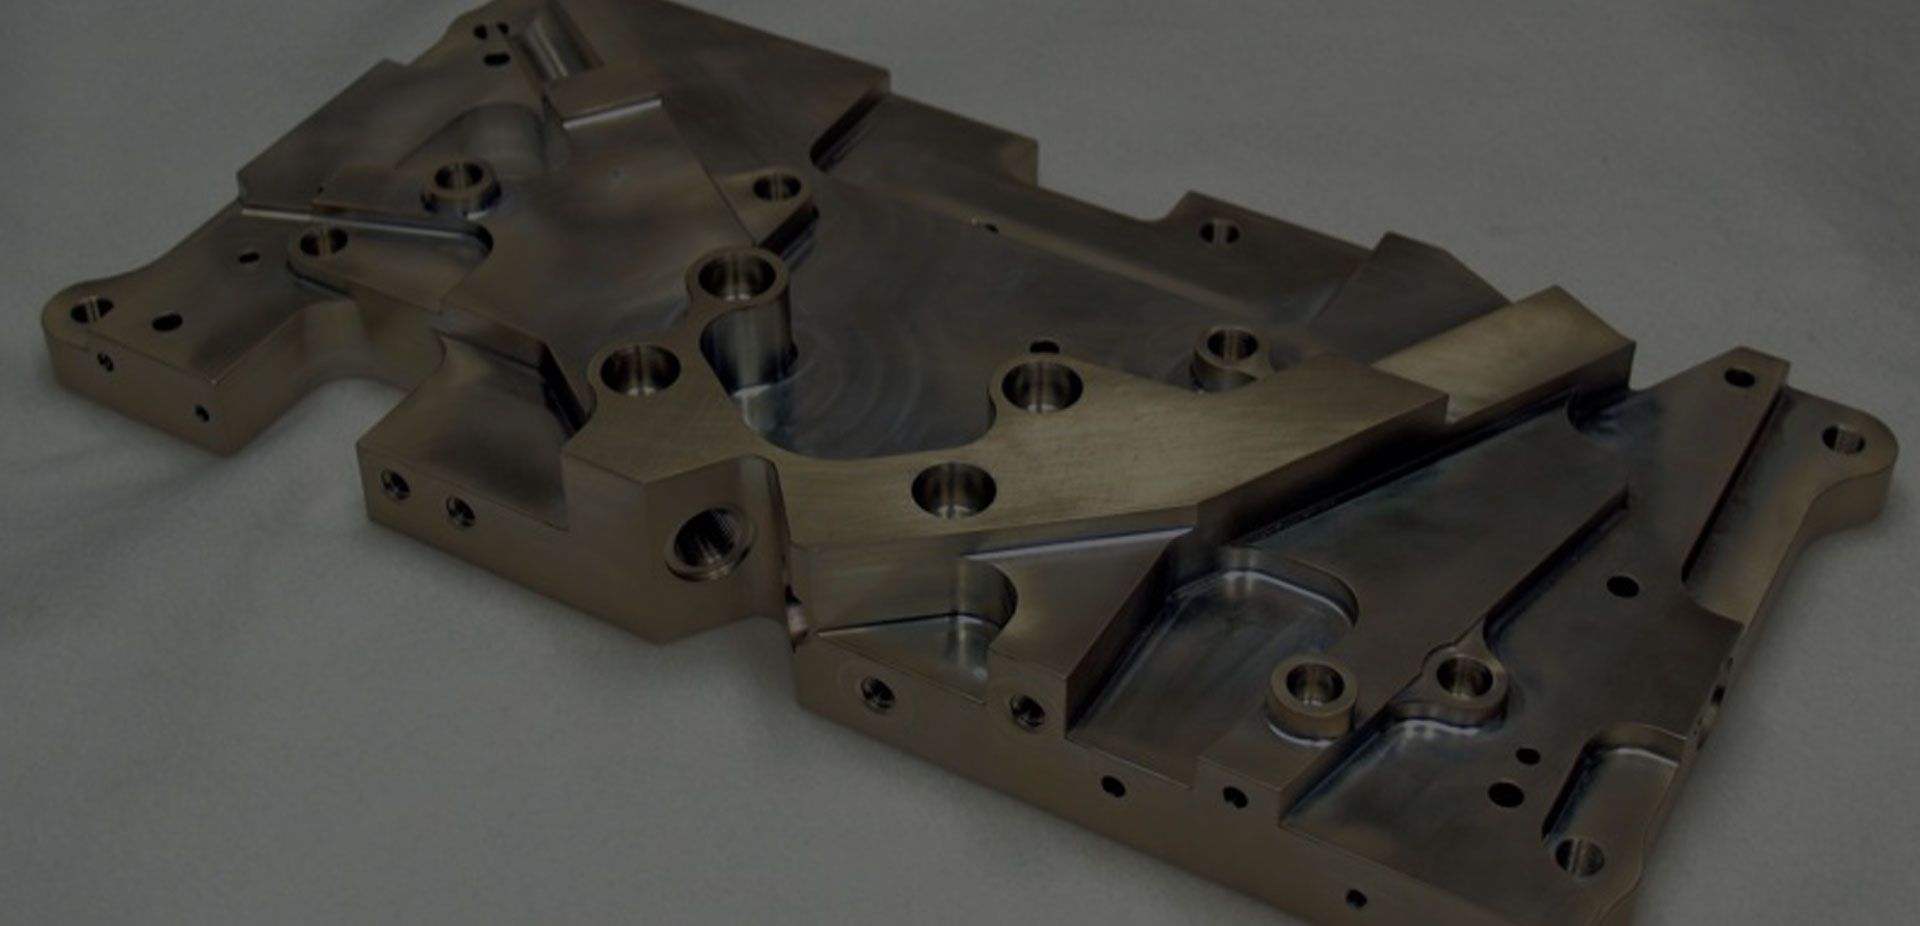 Mar Engineering - the machine shop for CNC machining solutions